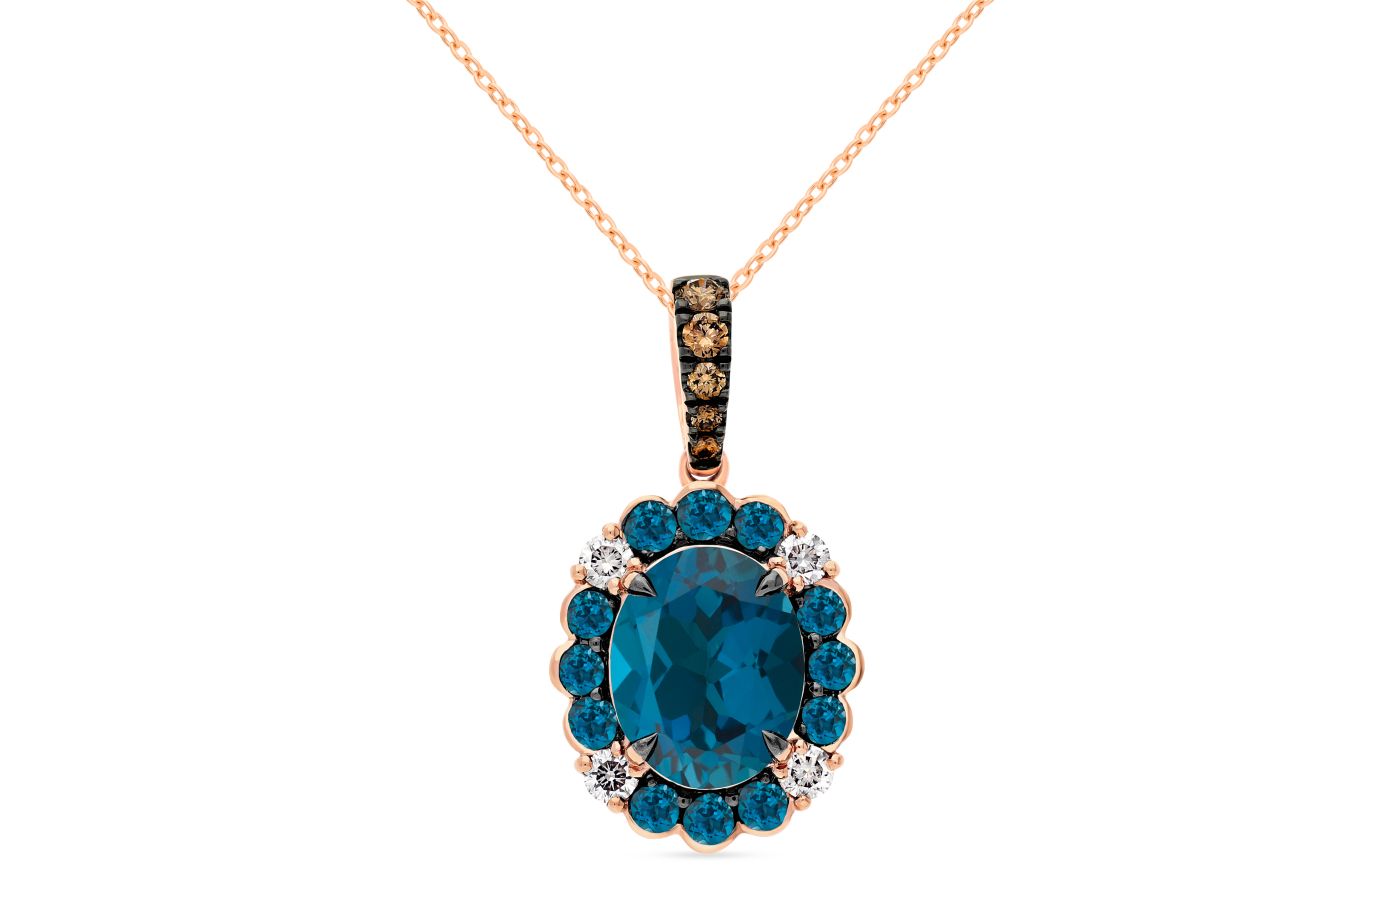 Le Vian's Couture High Jewellery is a Gemstone Paradise